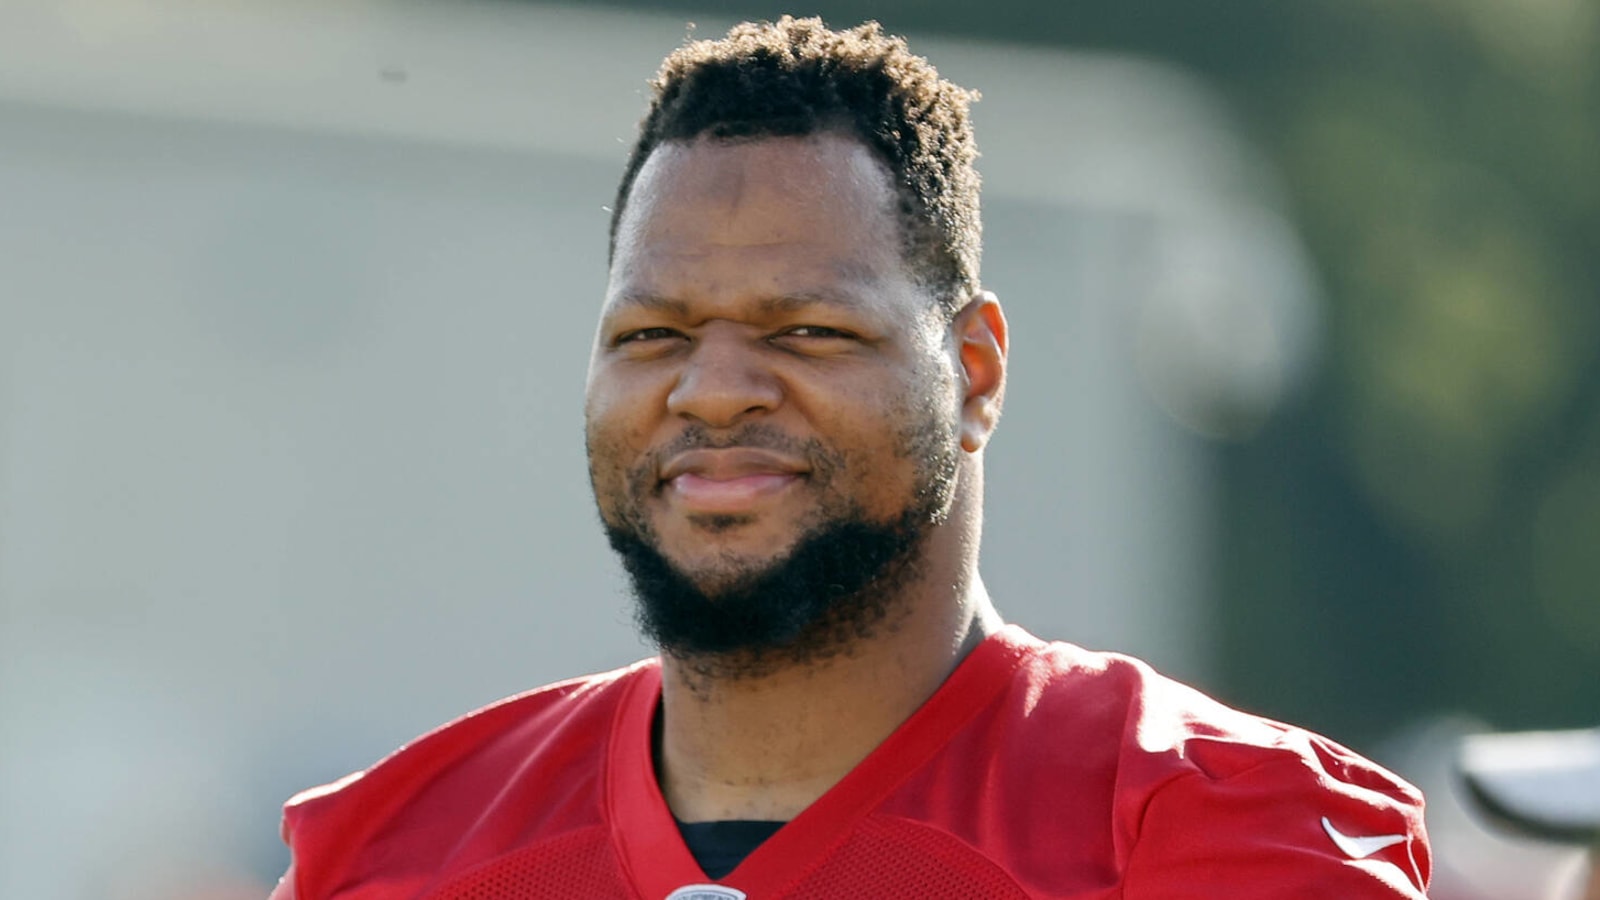 Ndamukong Suh on NFL future: 'It looks like the Bucs are out of the picture'